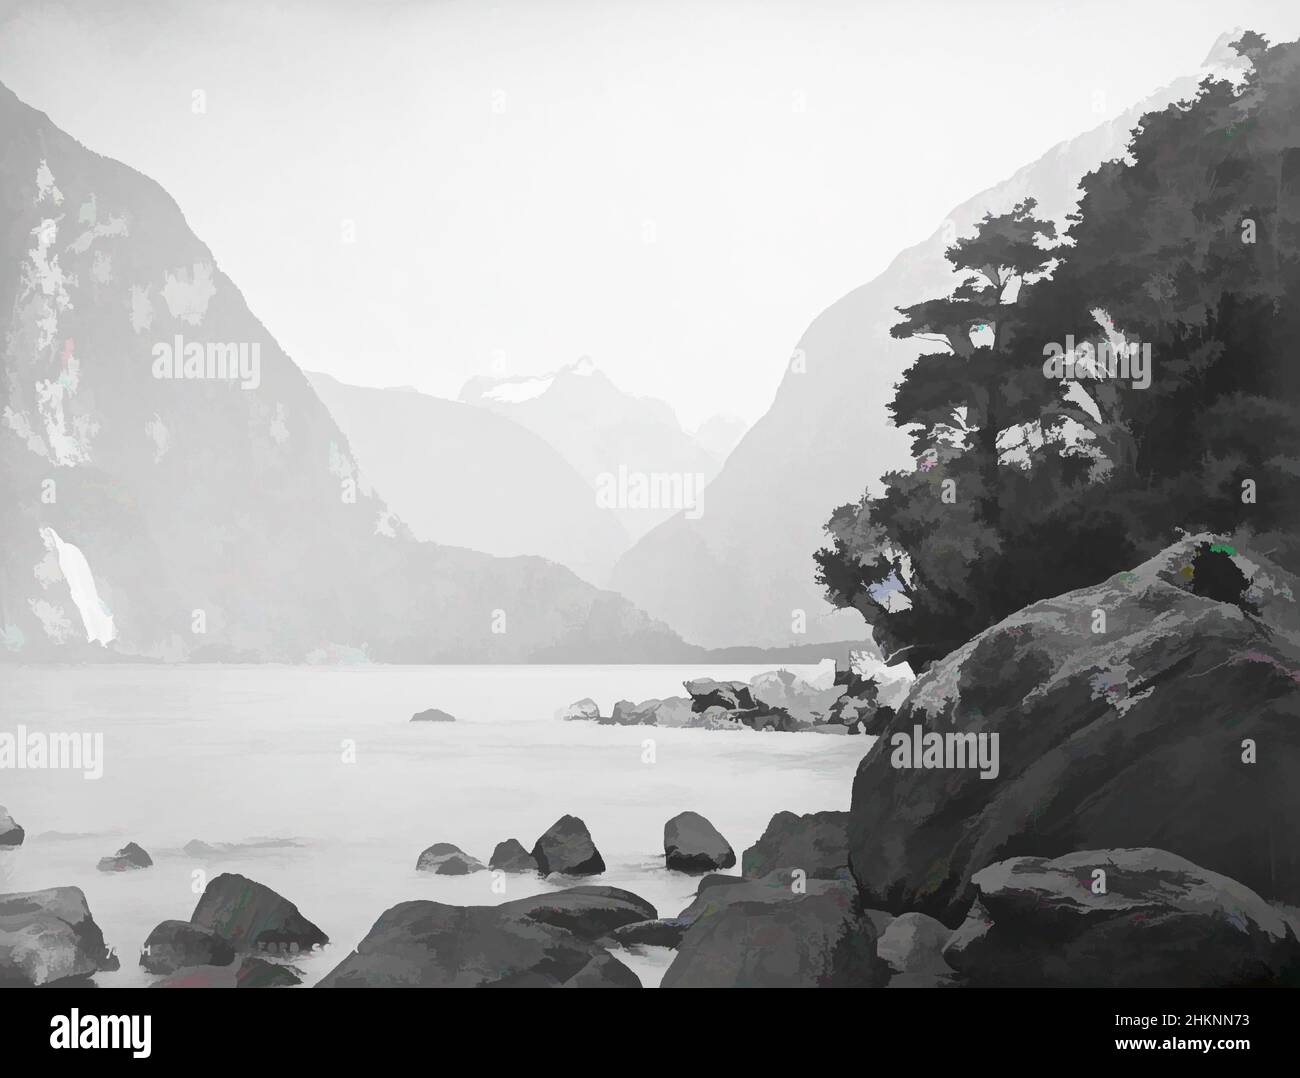 Art inspired by Head of Milford Sound, from Sinbad Gully, Burton Brothers studio, photography studio, New Zealand, gelatin dry plate process, Classic works modernized by Artotop with a splash of modernity. Shapes, color and value, eye-catching visual impact on art. Emotions through freedom of artworks in a contemporary way. A timeless message pursuing a wildly creative new direction. Artists turning to the digital medium and creating the Artotop NFT Stock Photo